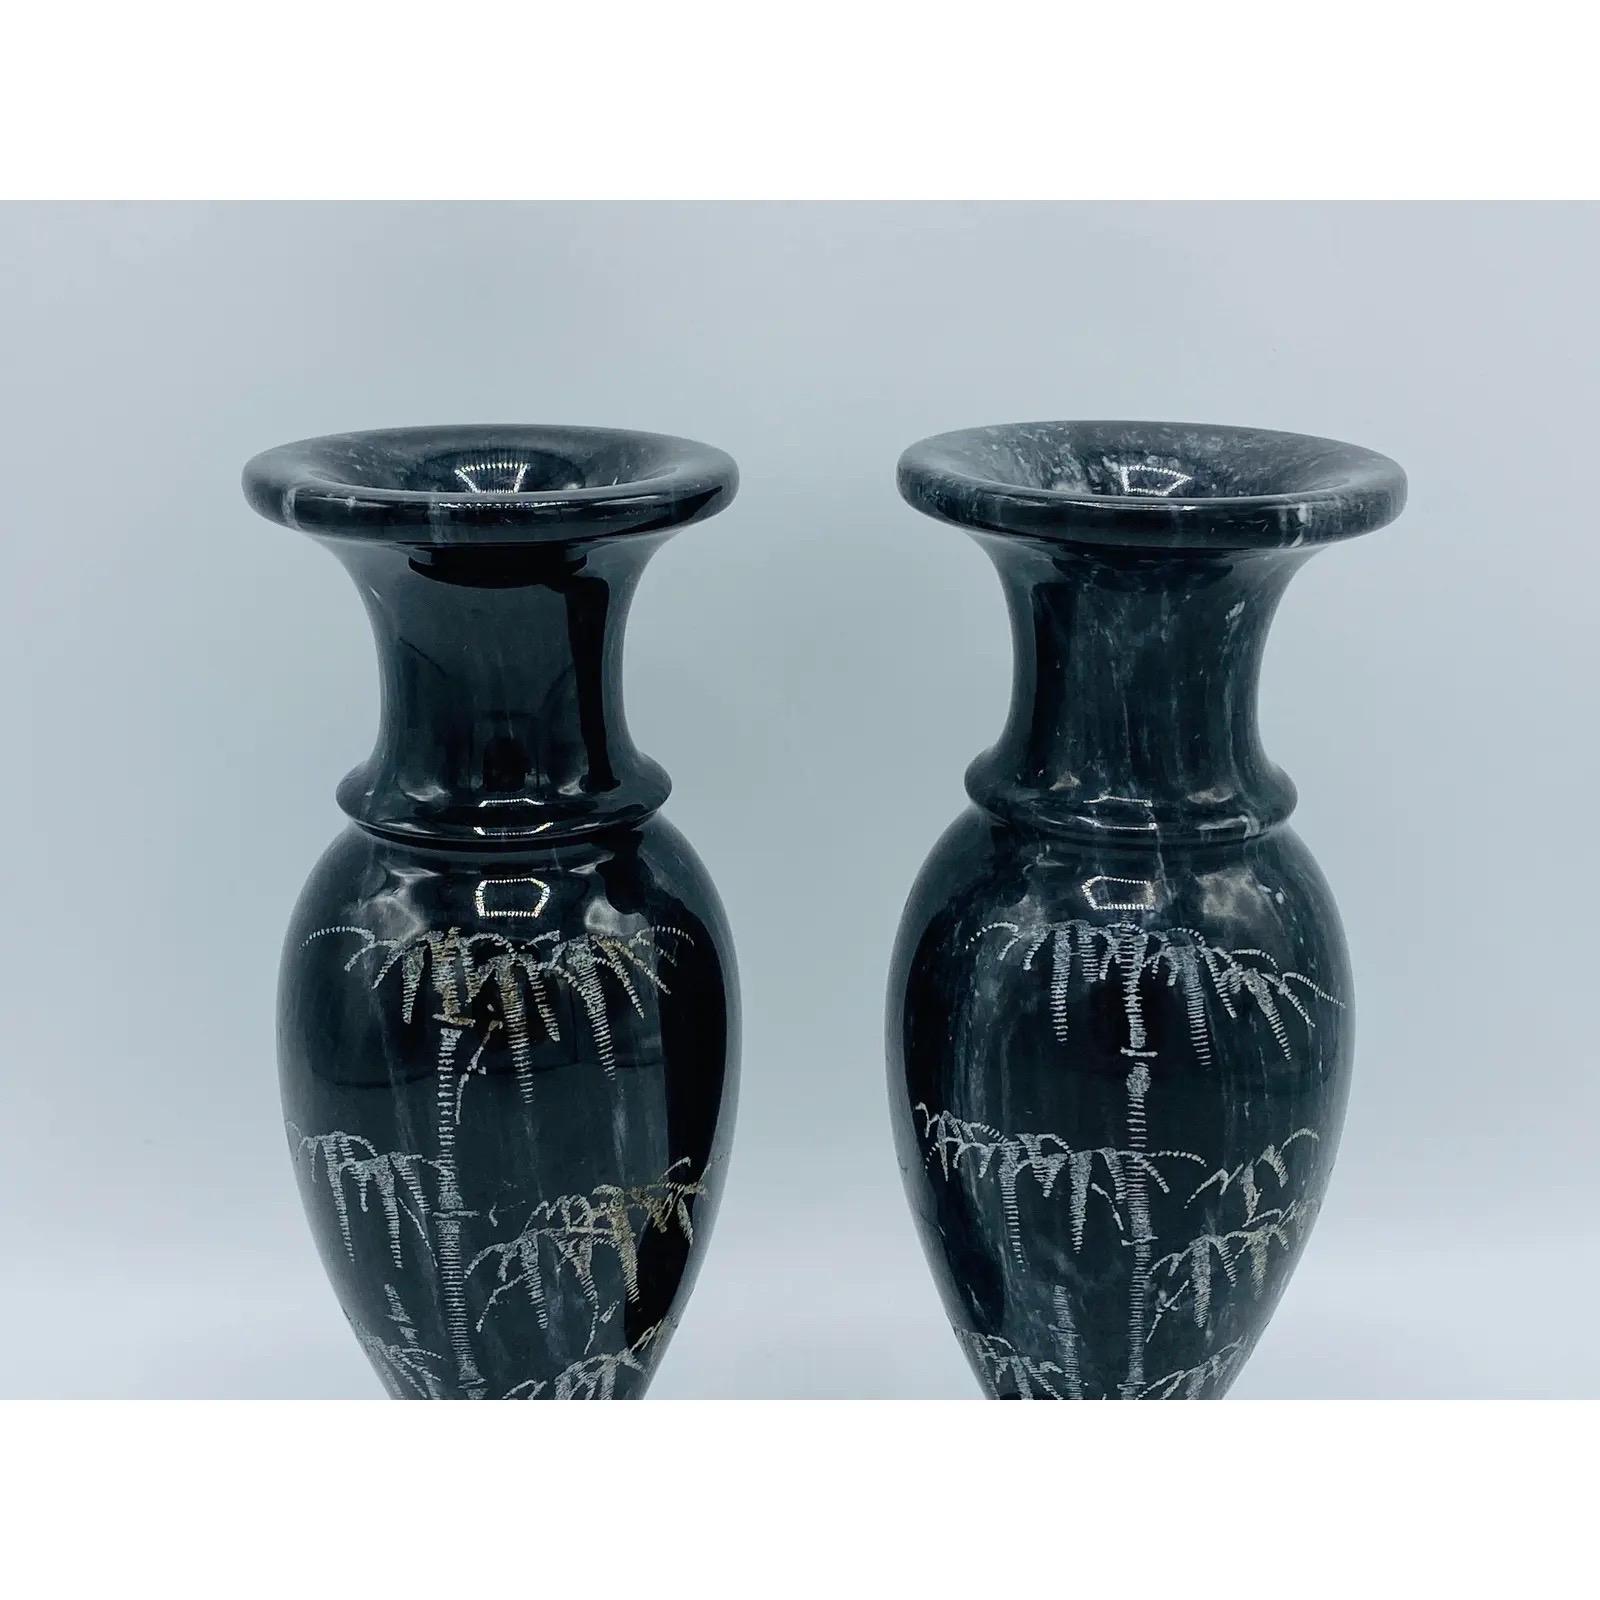 Listed is a stunning, pair of 1960's Italian marble vases. The pair are primarily black with white veining and a bamboo motif etched along one side of each. Heavy, weighing 4.7lbs/pair.